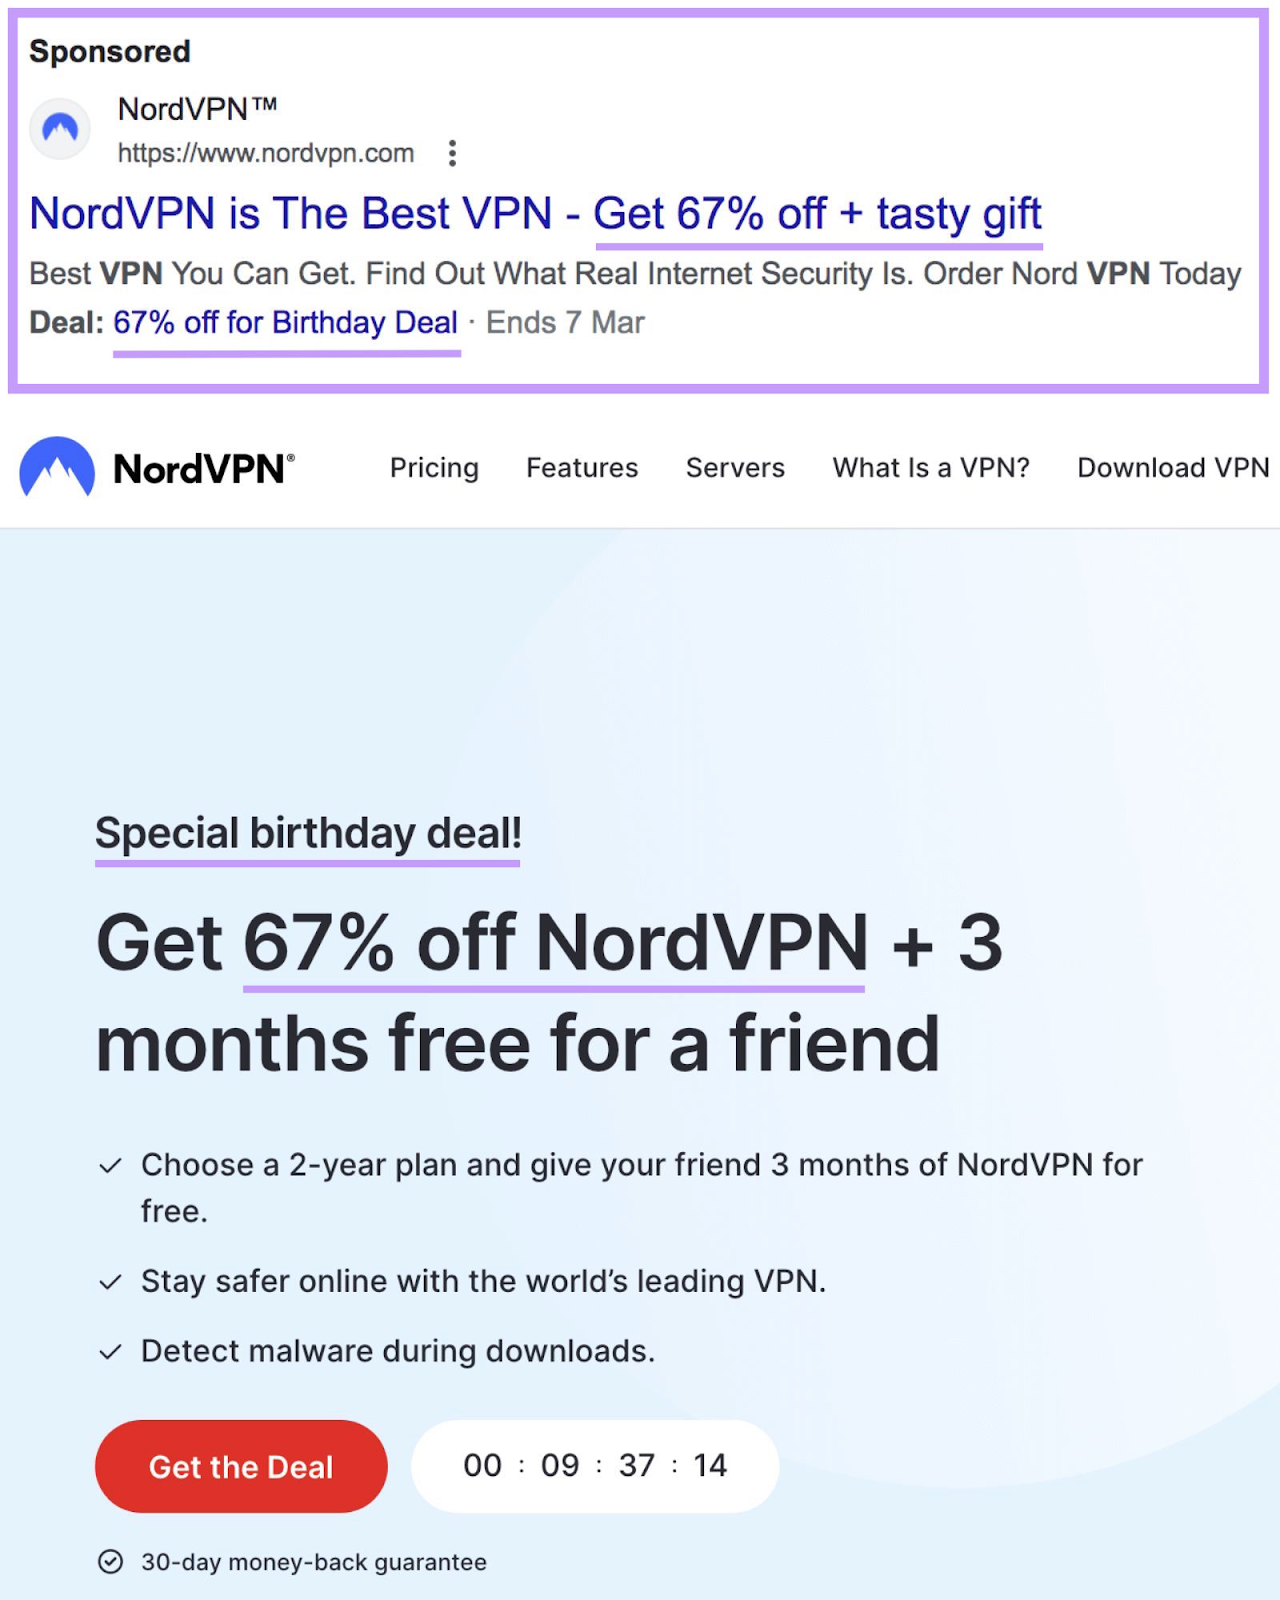 NordVPN's PPC advertisement  and a landing leafage   associated with the ad